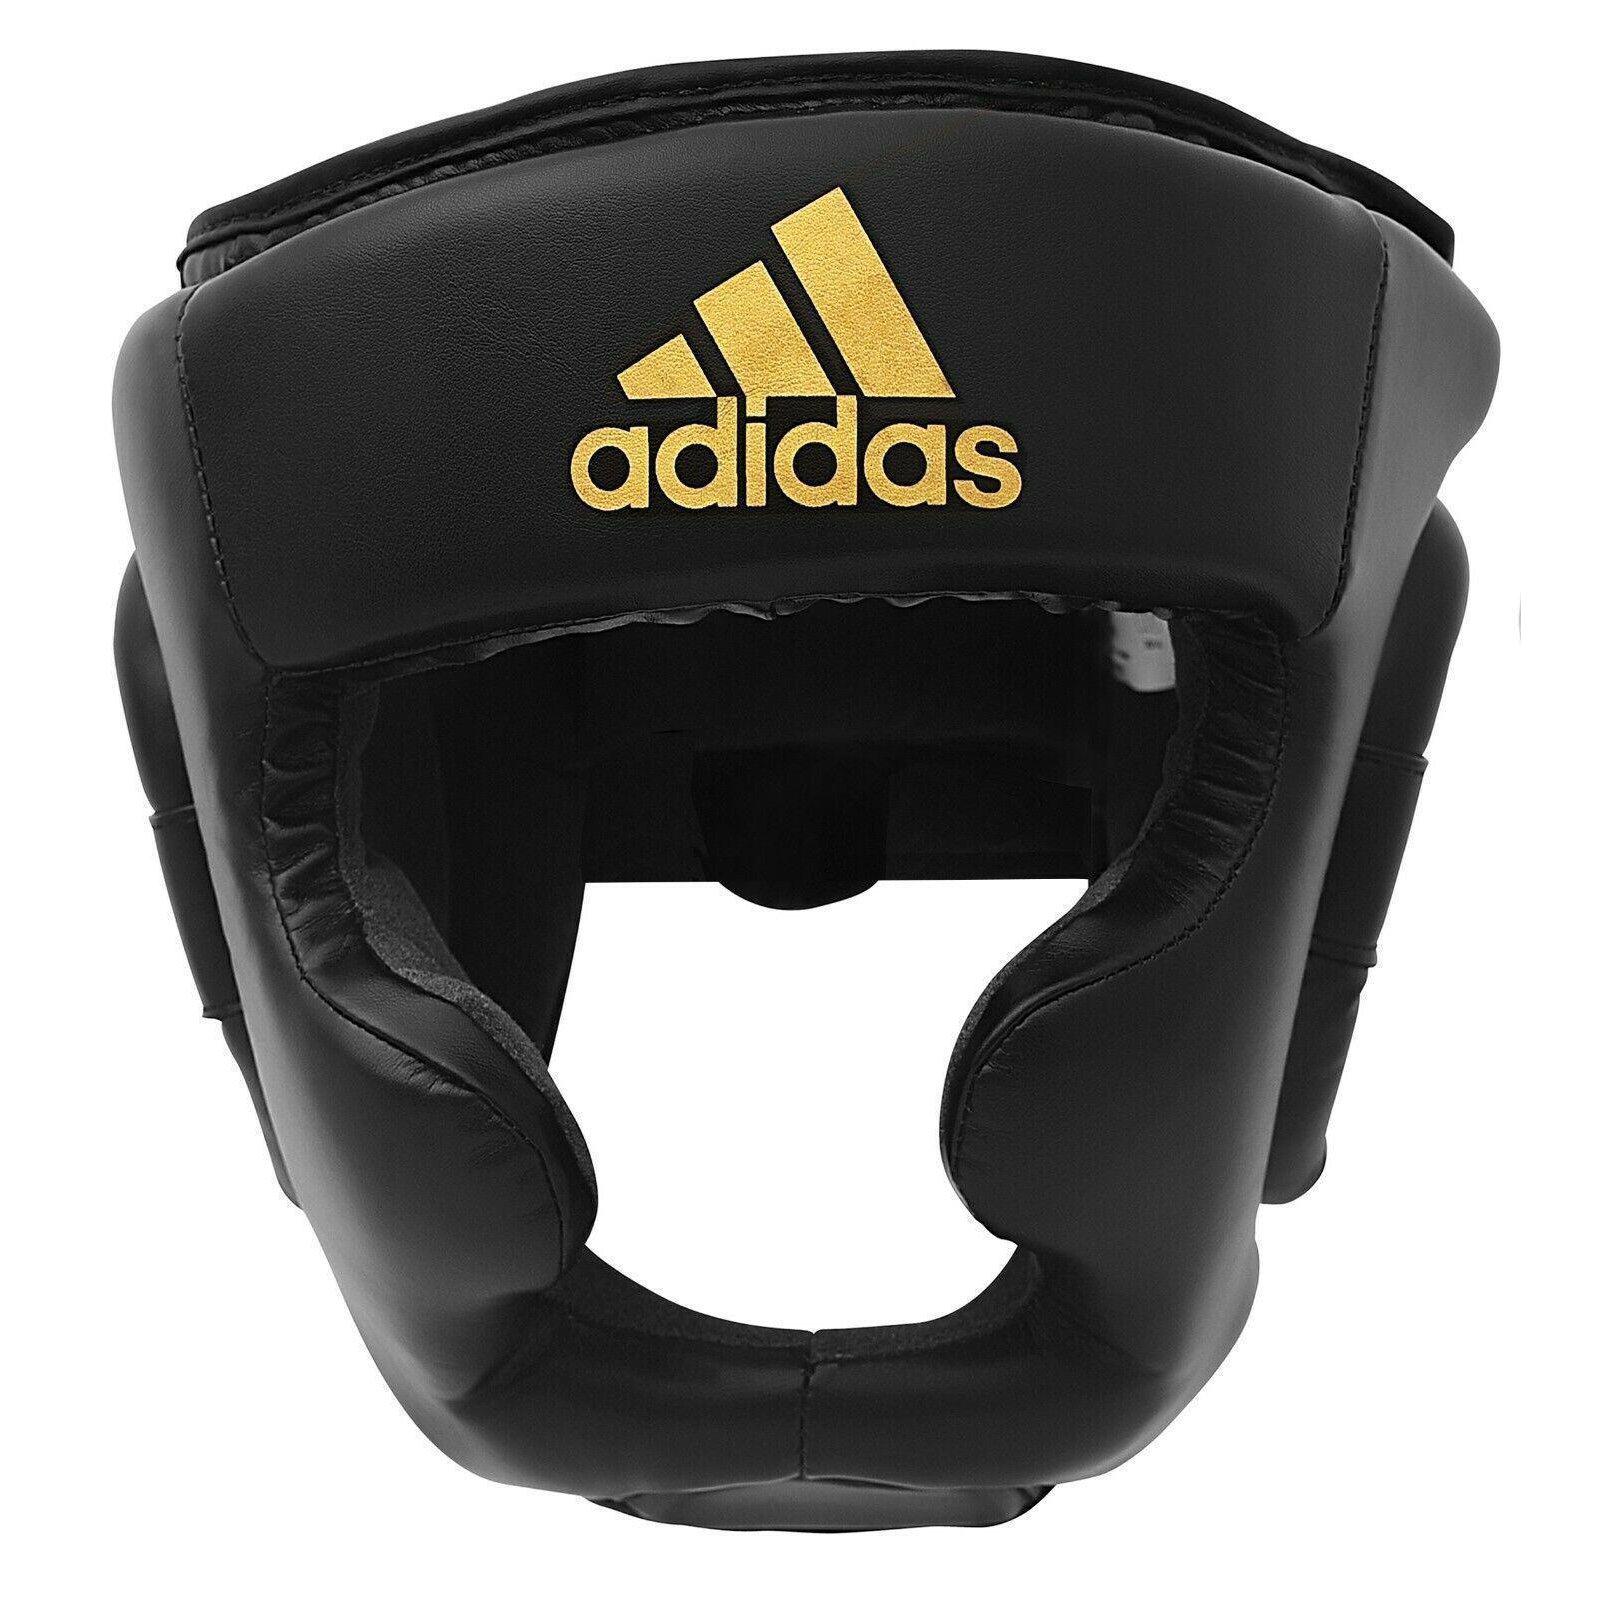 adidas Speed Full Face Boxing Head Guard Sparring